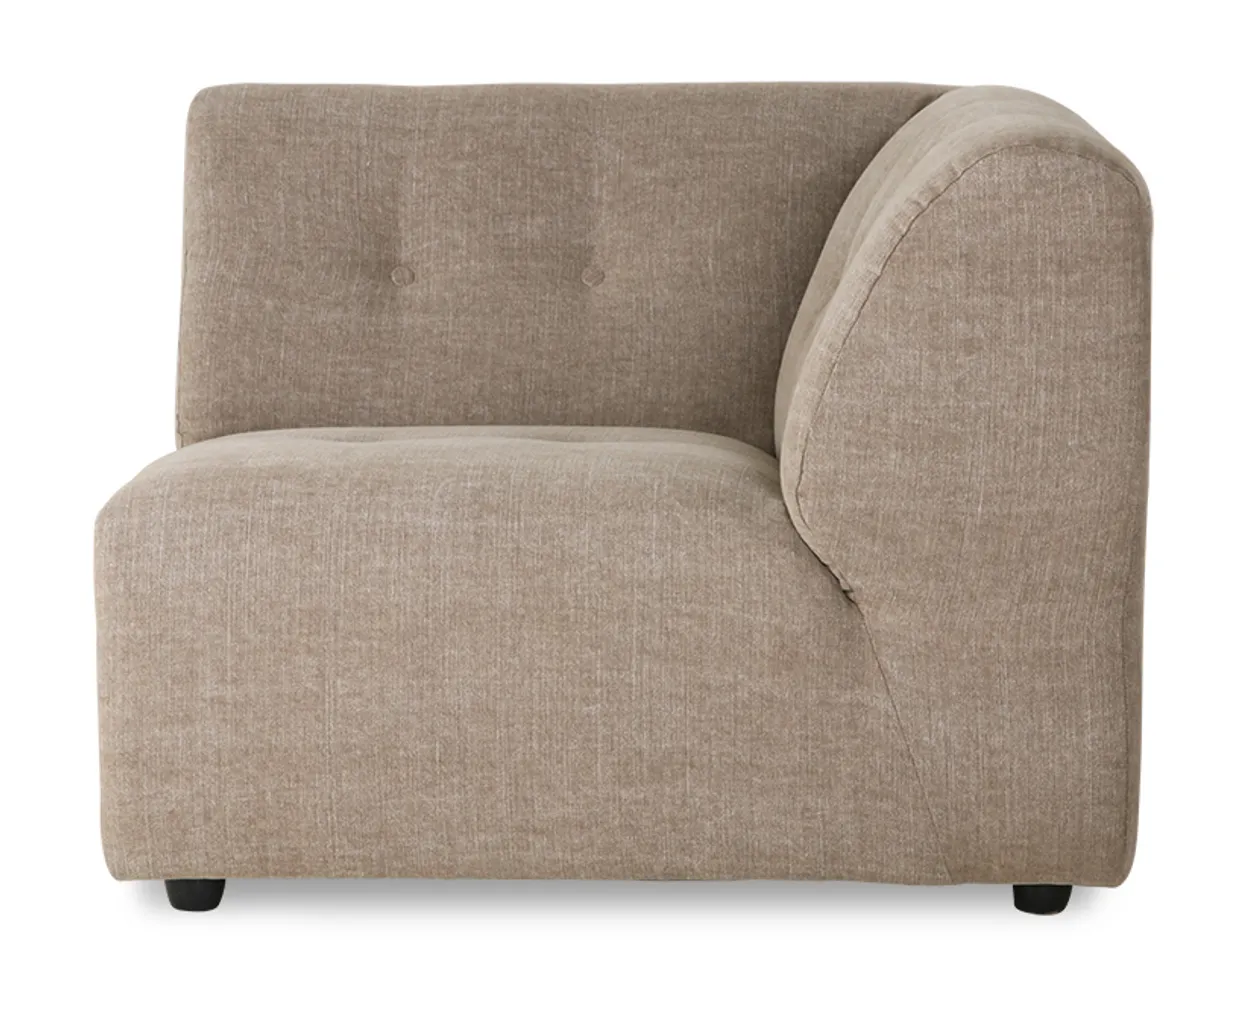 Vint couch: element right, linen blend, taupe